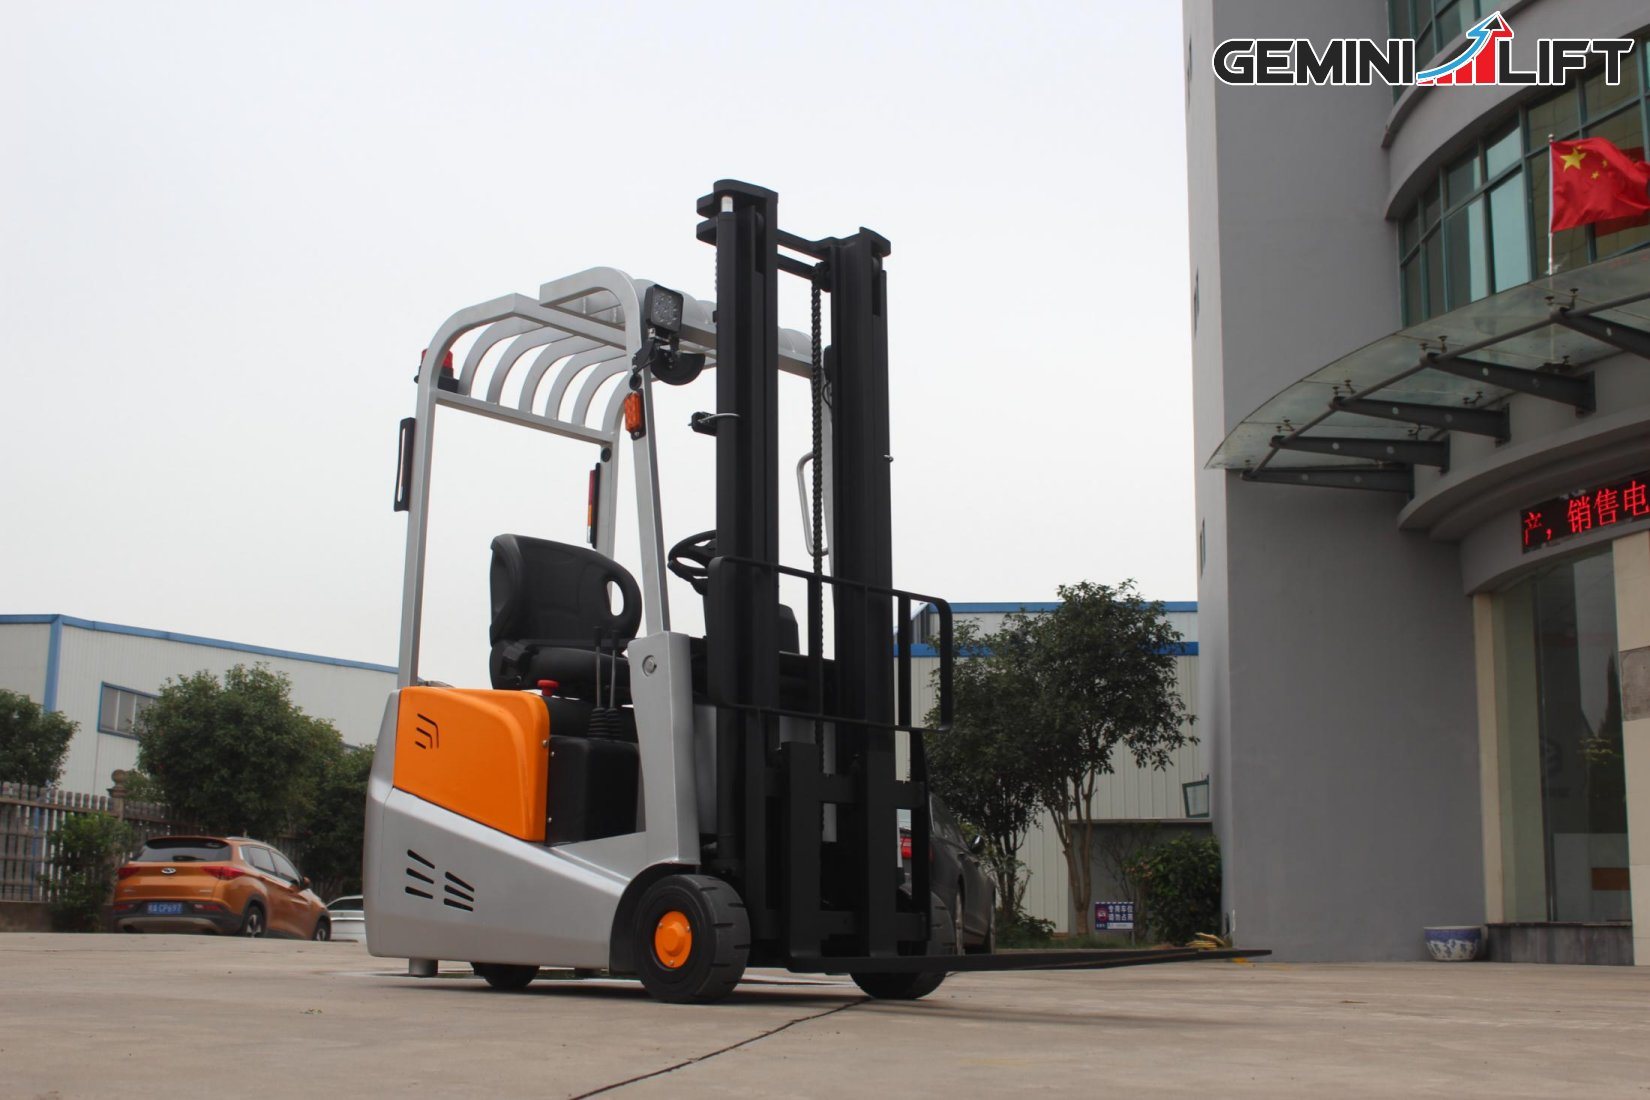 Full Electric Forklift in Warehouse with Crane